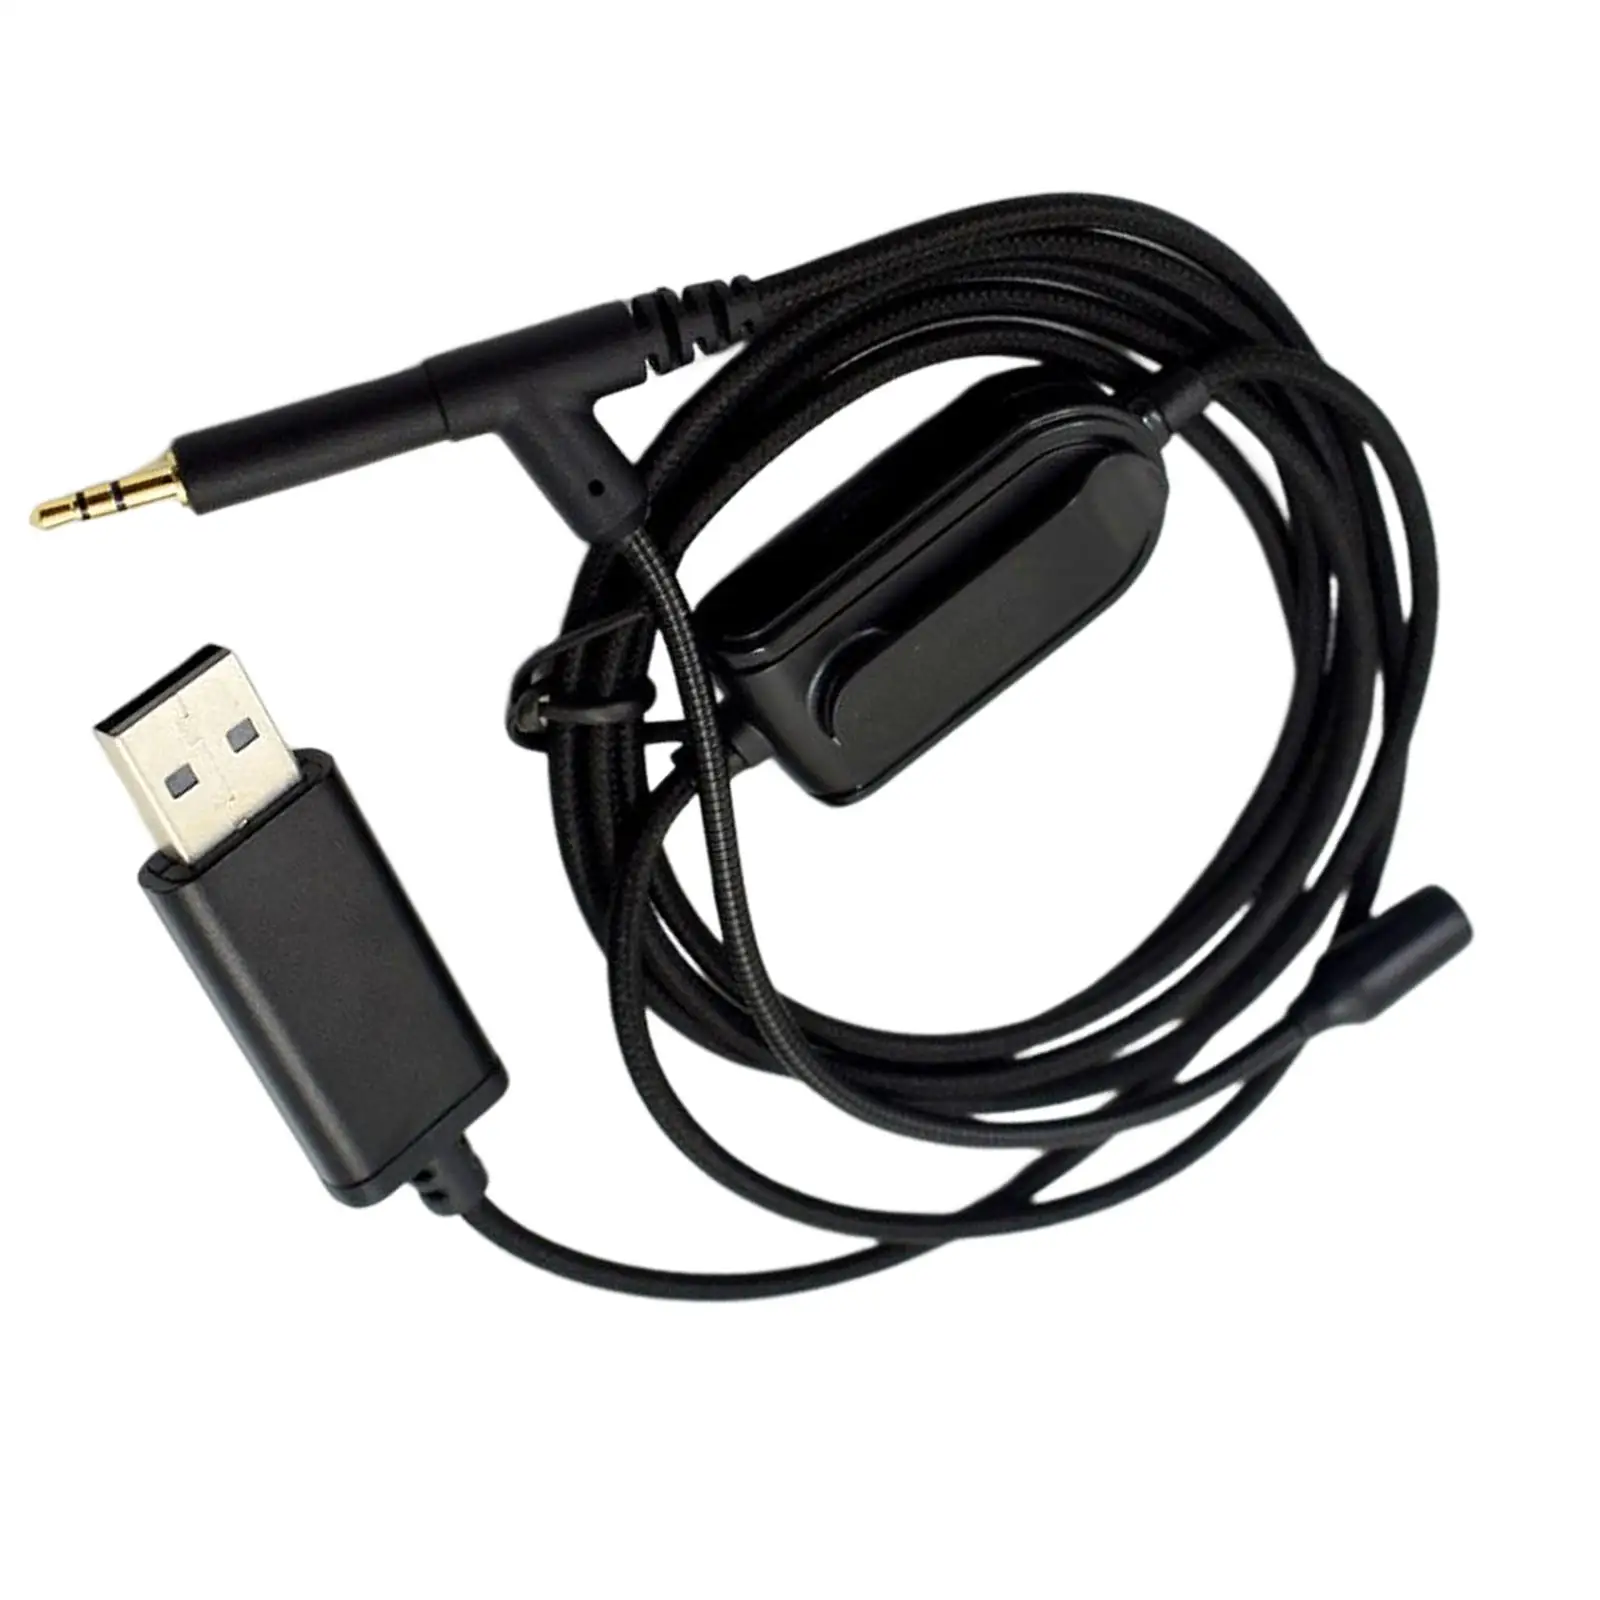 1.8 to 2.5mm Earphone Audio Cable, with Mic and Volume Control,Plug and Play Stereo Cord Cord for QC35 Y55 Y45 Y50 QC45